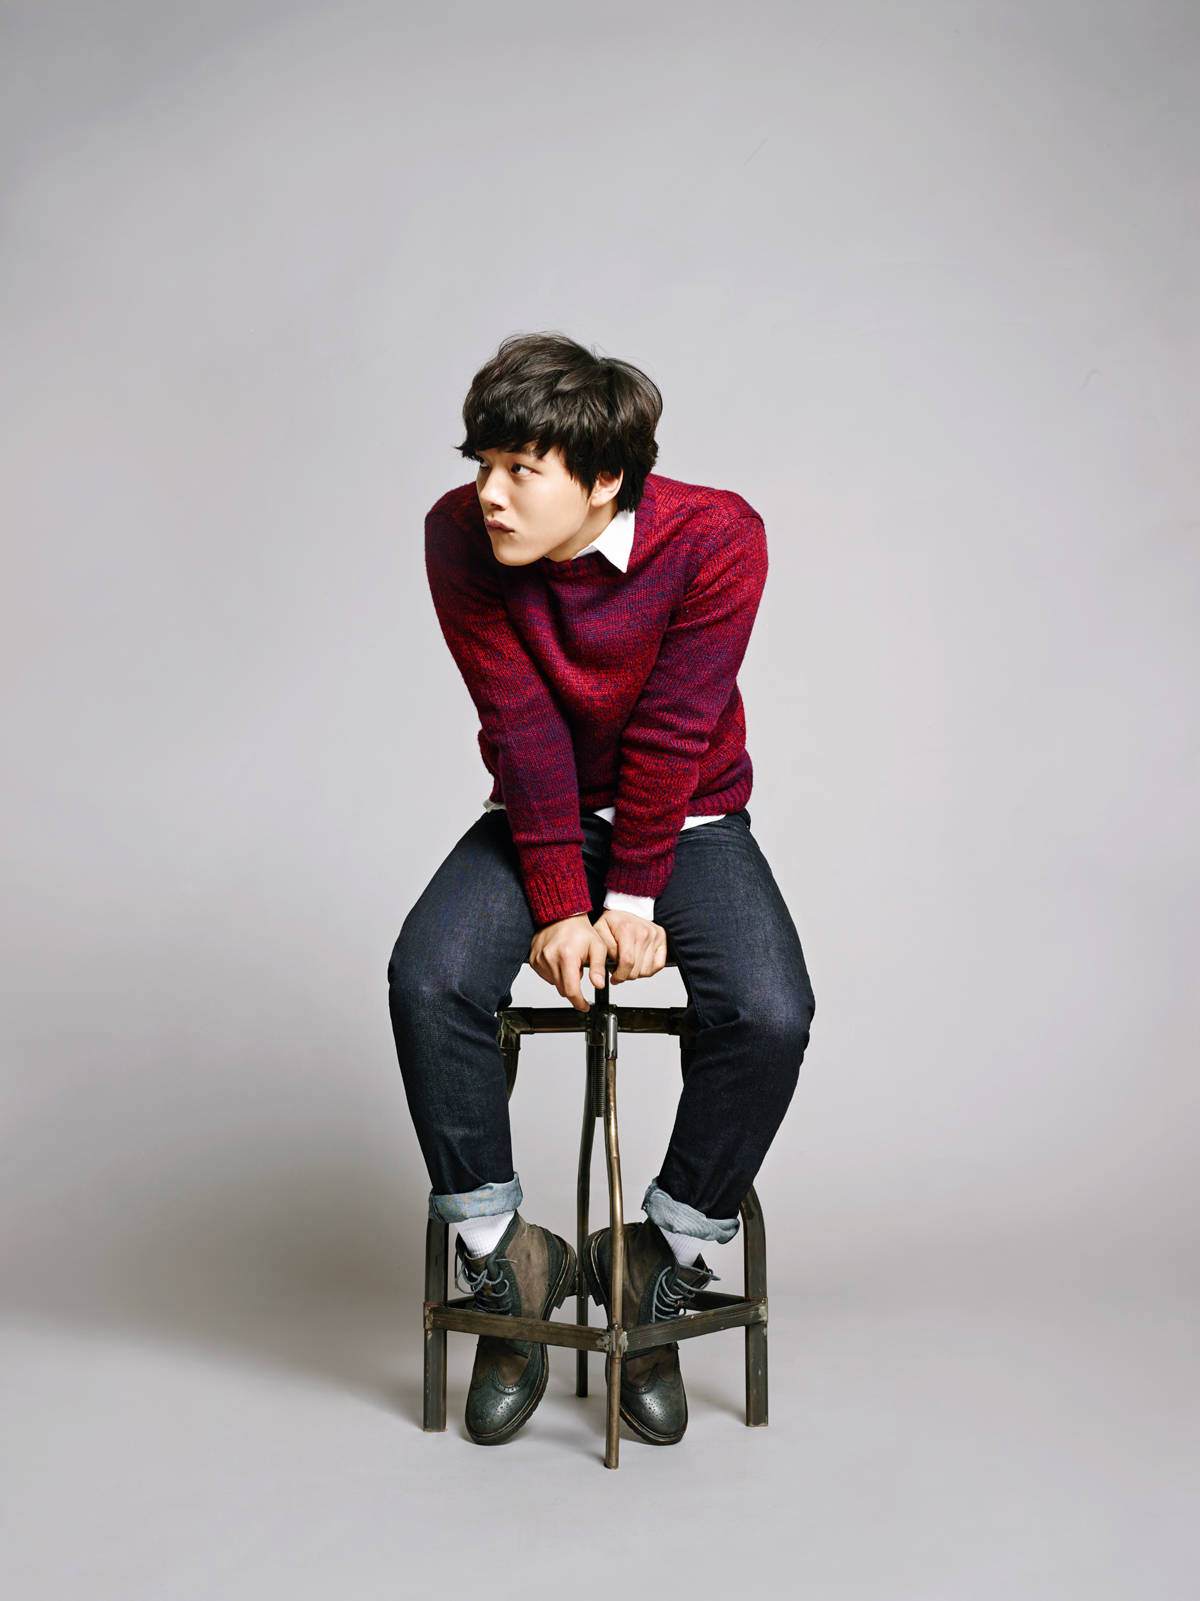 Yeo Jin Goo In Red Outfit Wallpaper